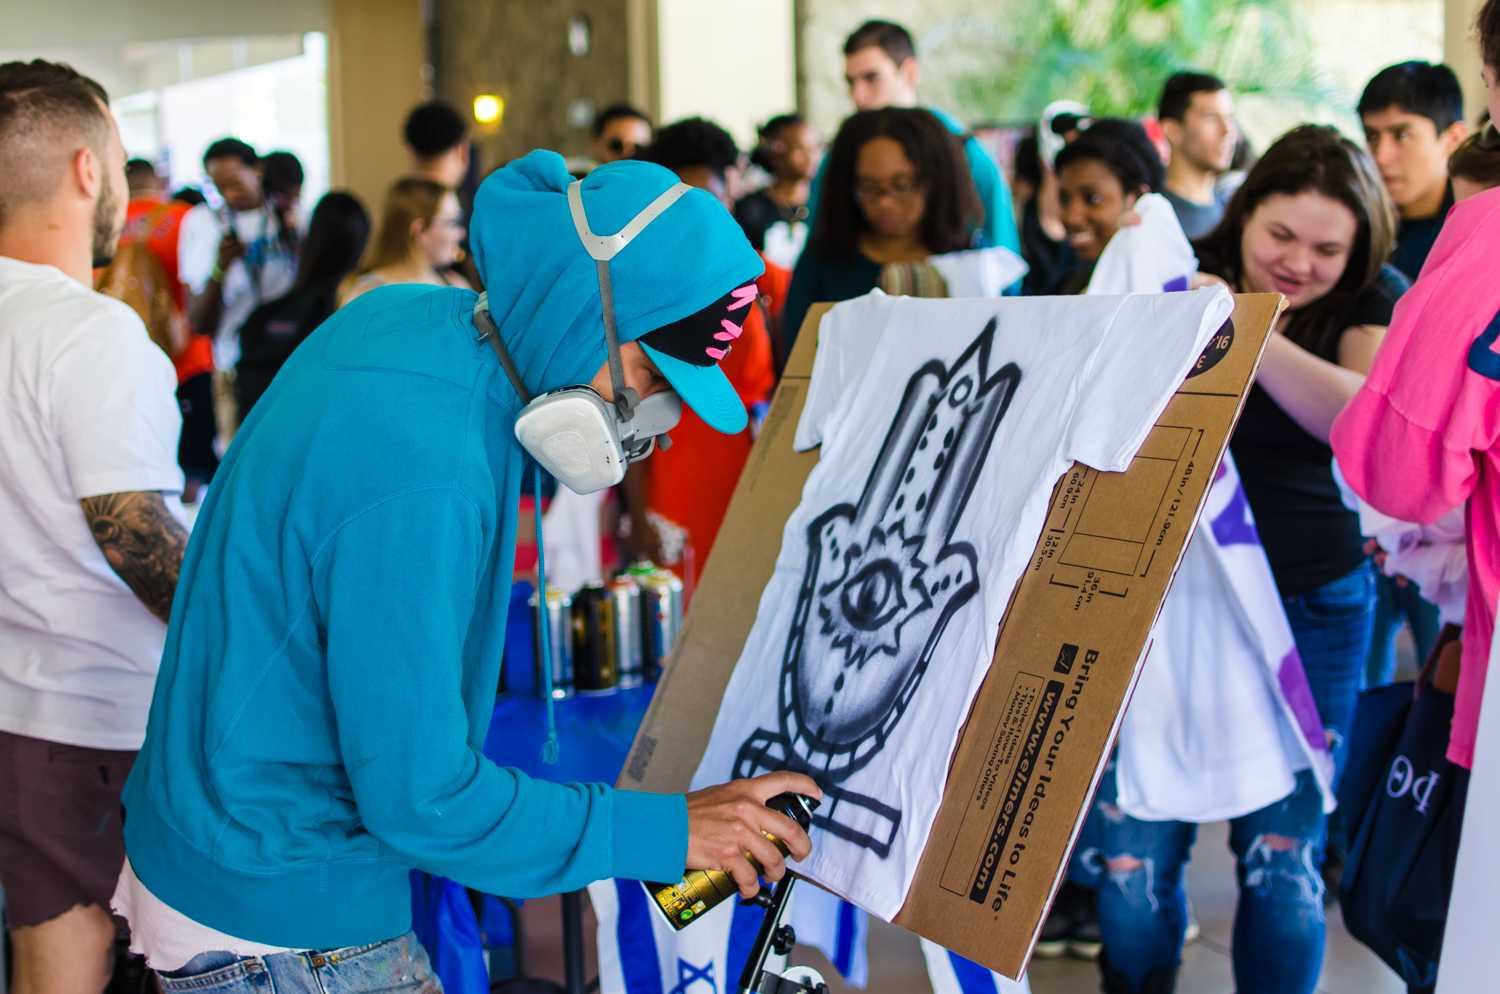 The graffiti artist putting finishing touches on a shirt requested by a student during the “Artists for Israel” event on Feb 12.